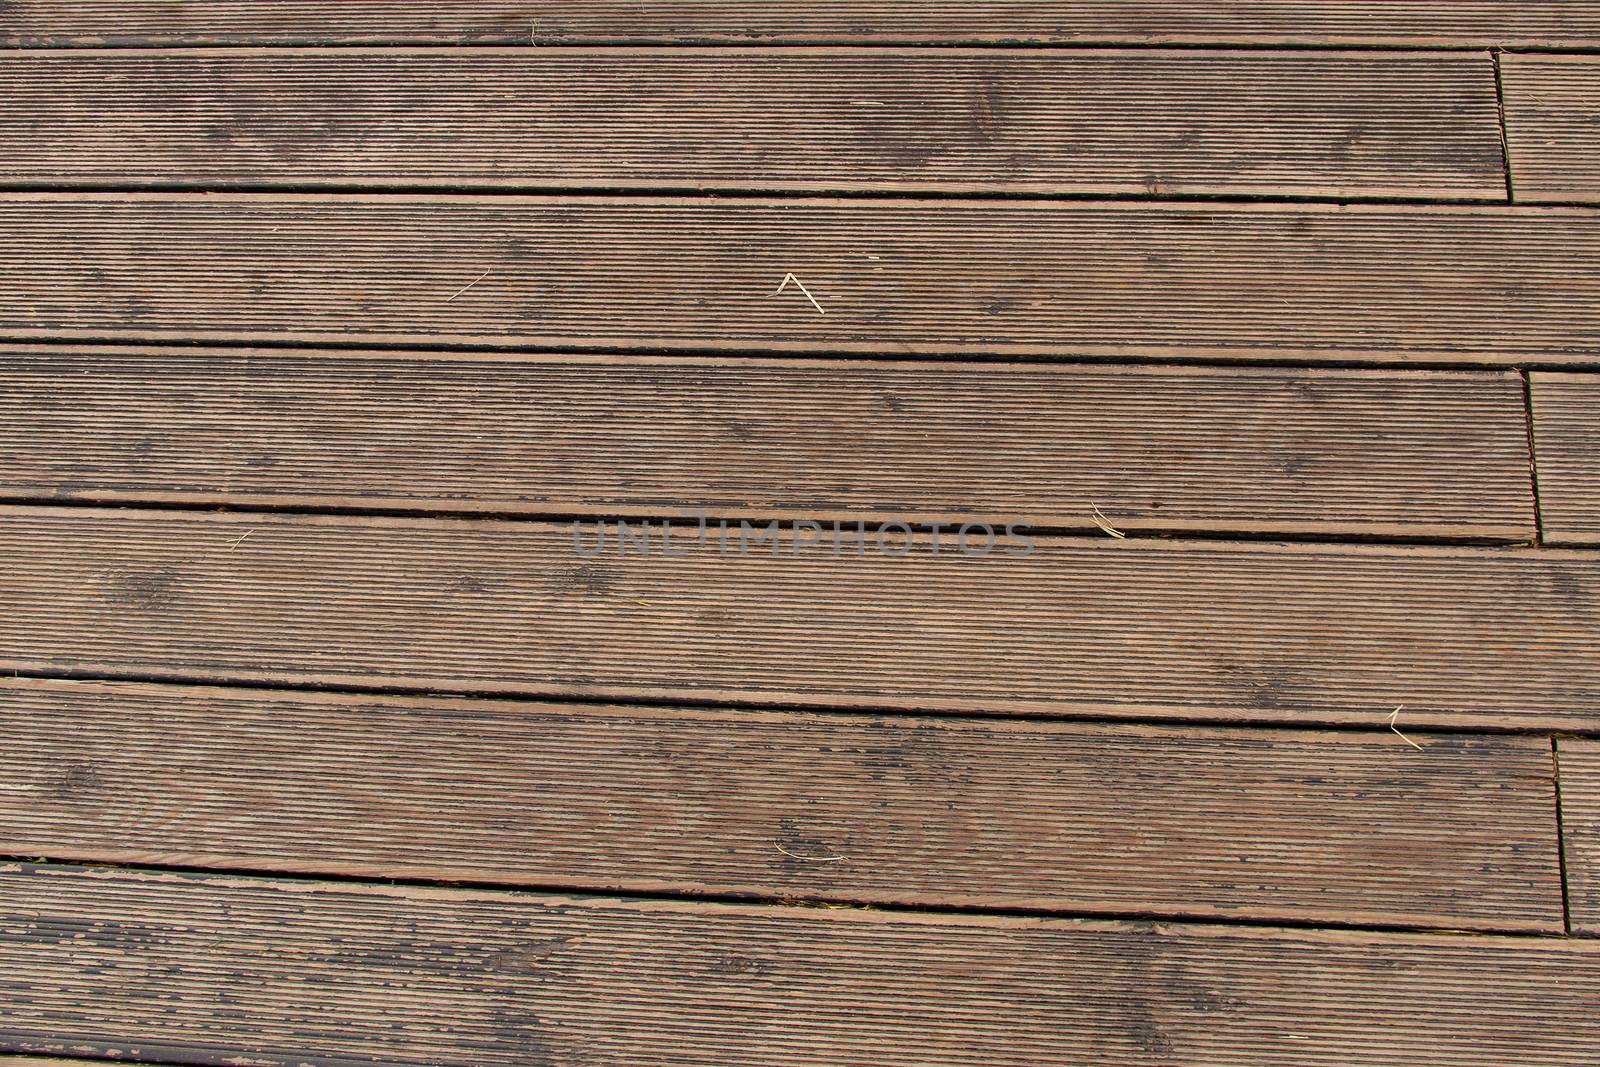 wood planks, old wood texture seamless background